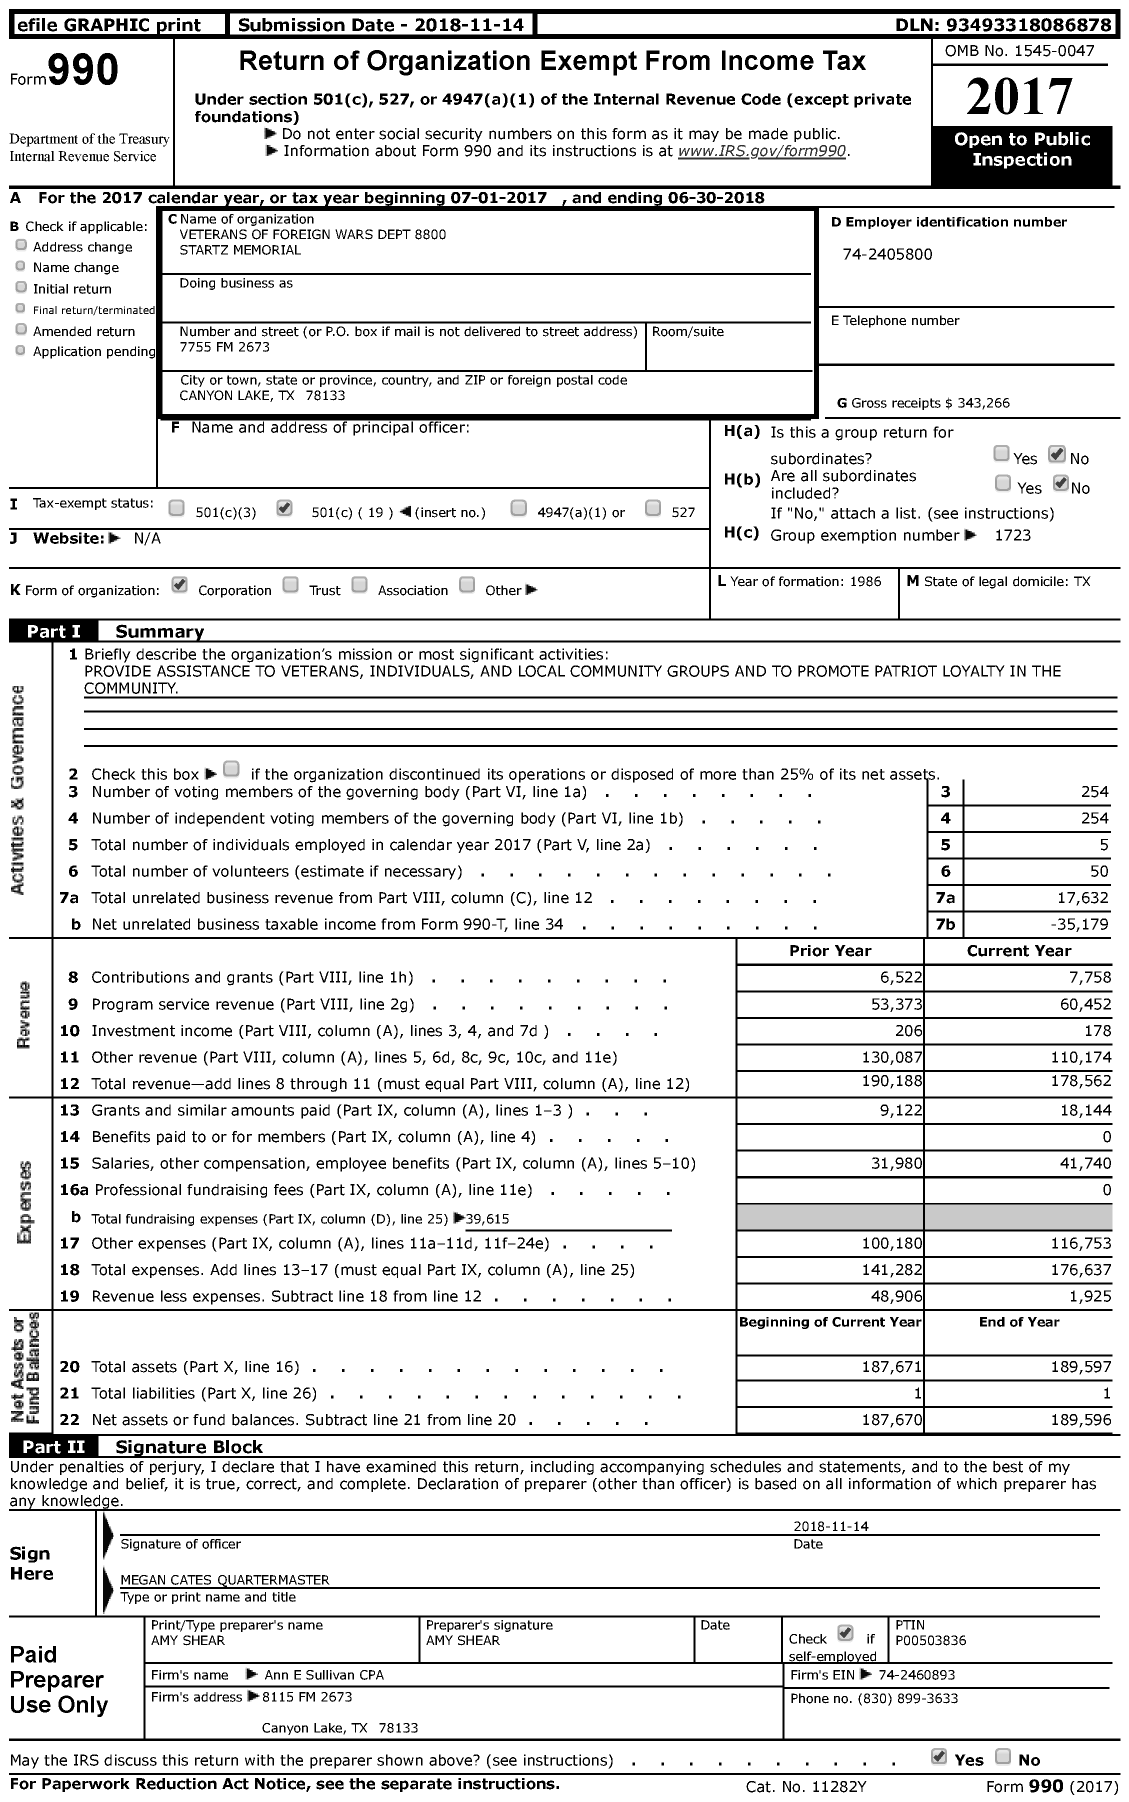 Image of first page of 2017 Form 990 for Texas VFW - 8800 Startz Memorial